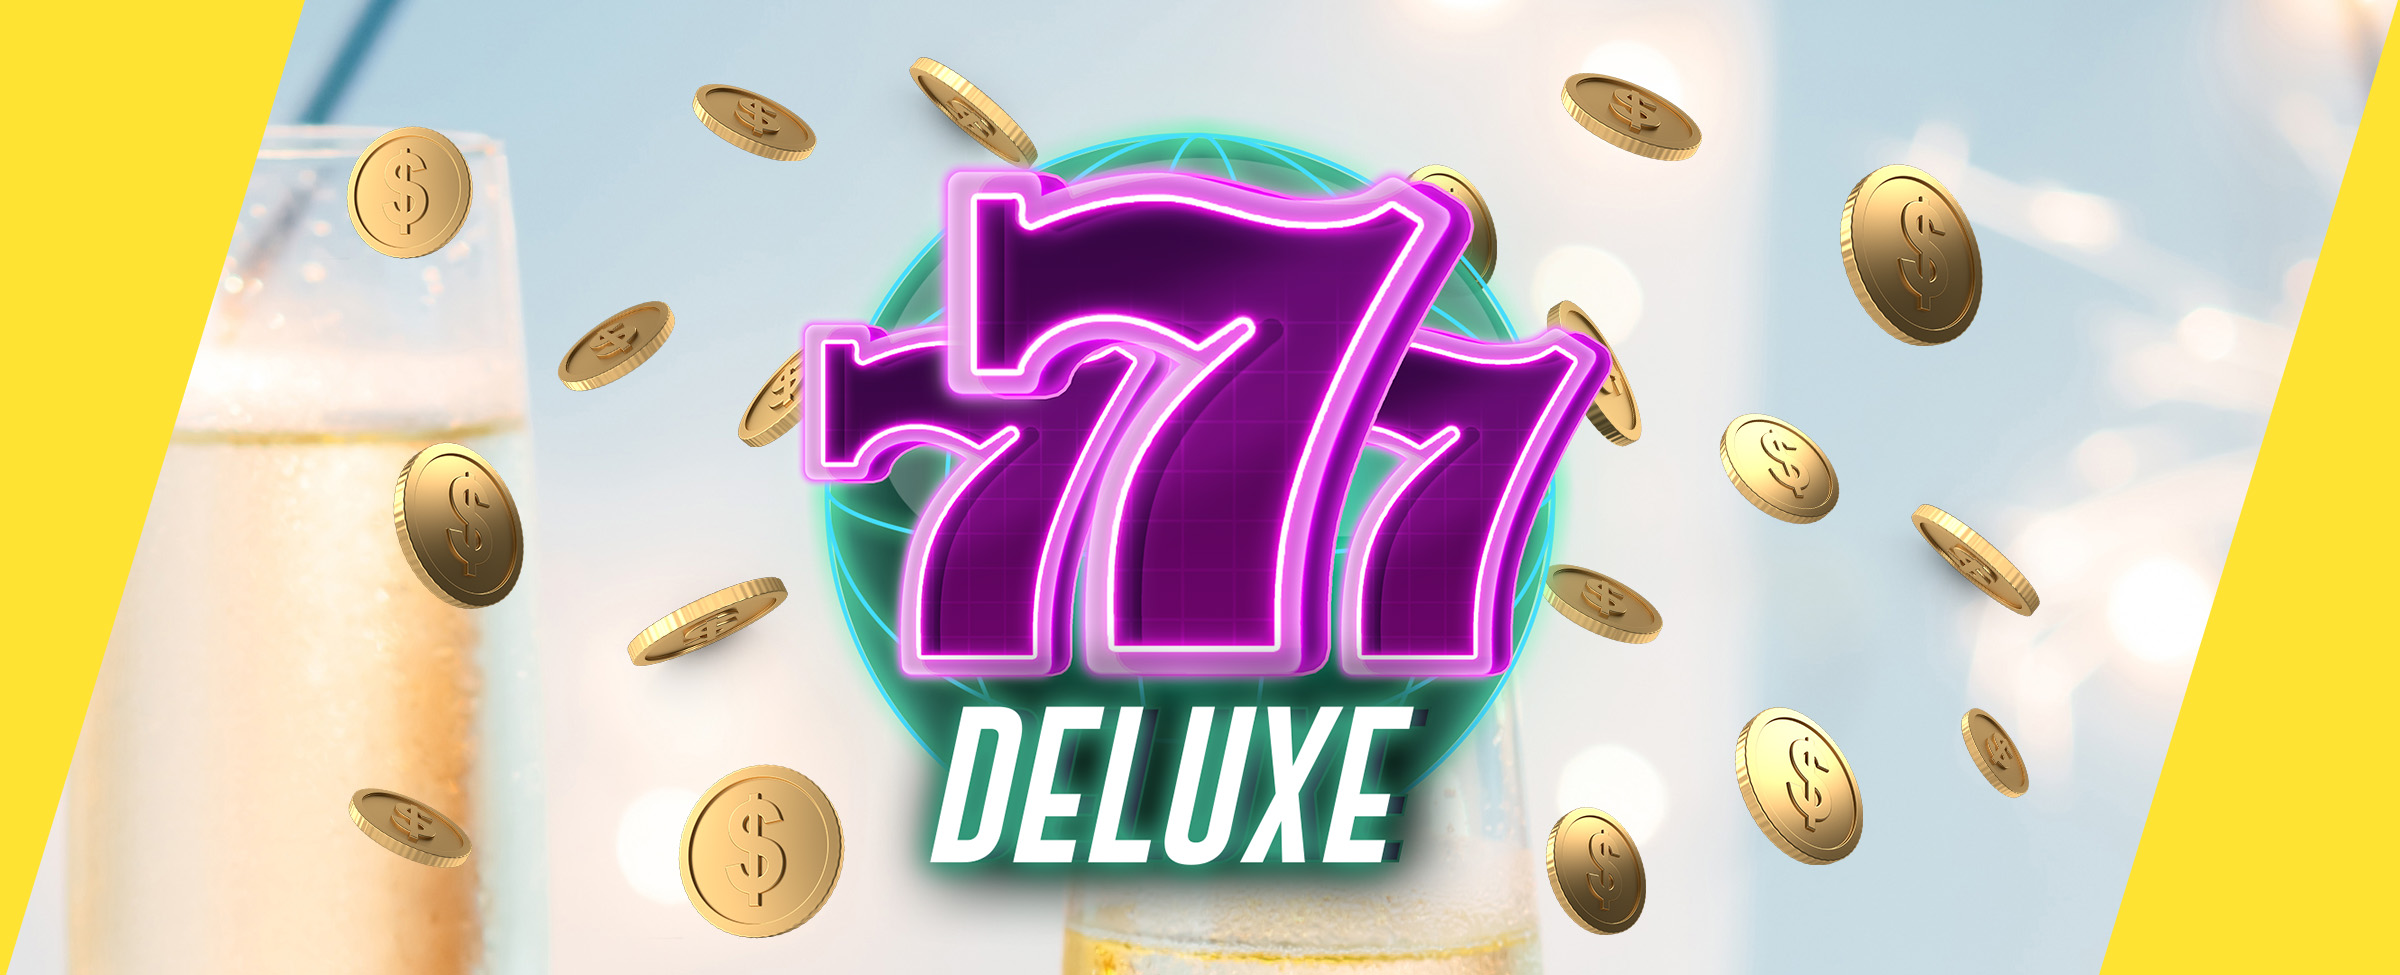 The 777 Deluxe logo from the Cafe Casino slot game is featured in the center of the image, surrounded by hovering gold coins, and sitting beside a frosty soda drink.